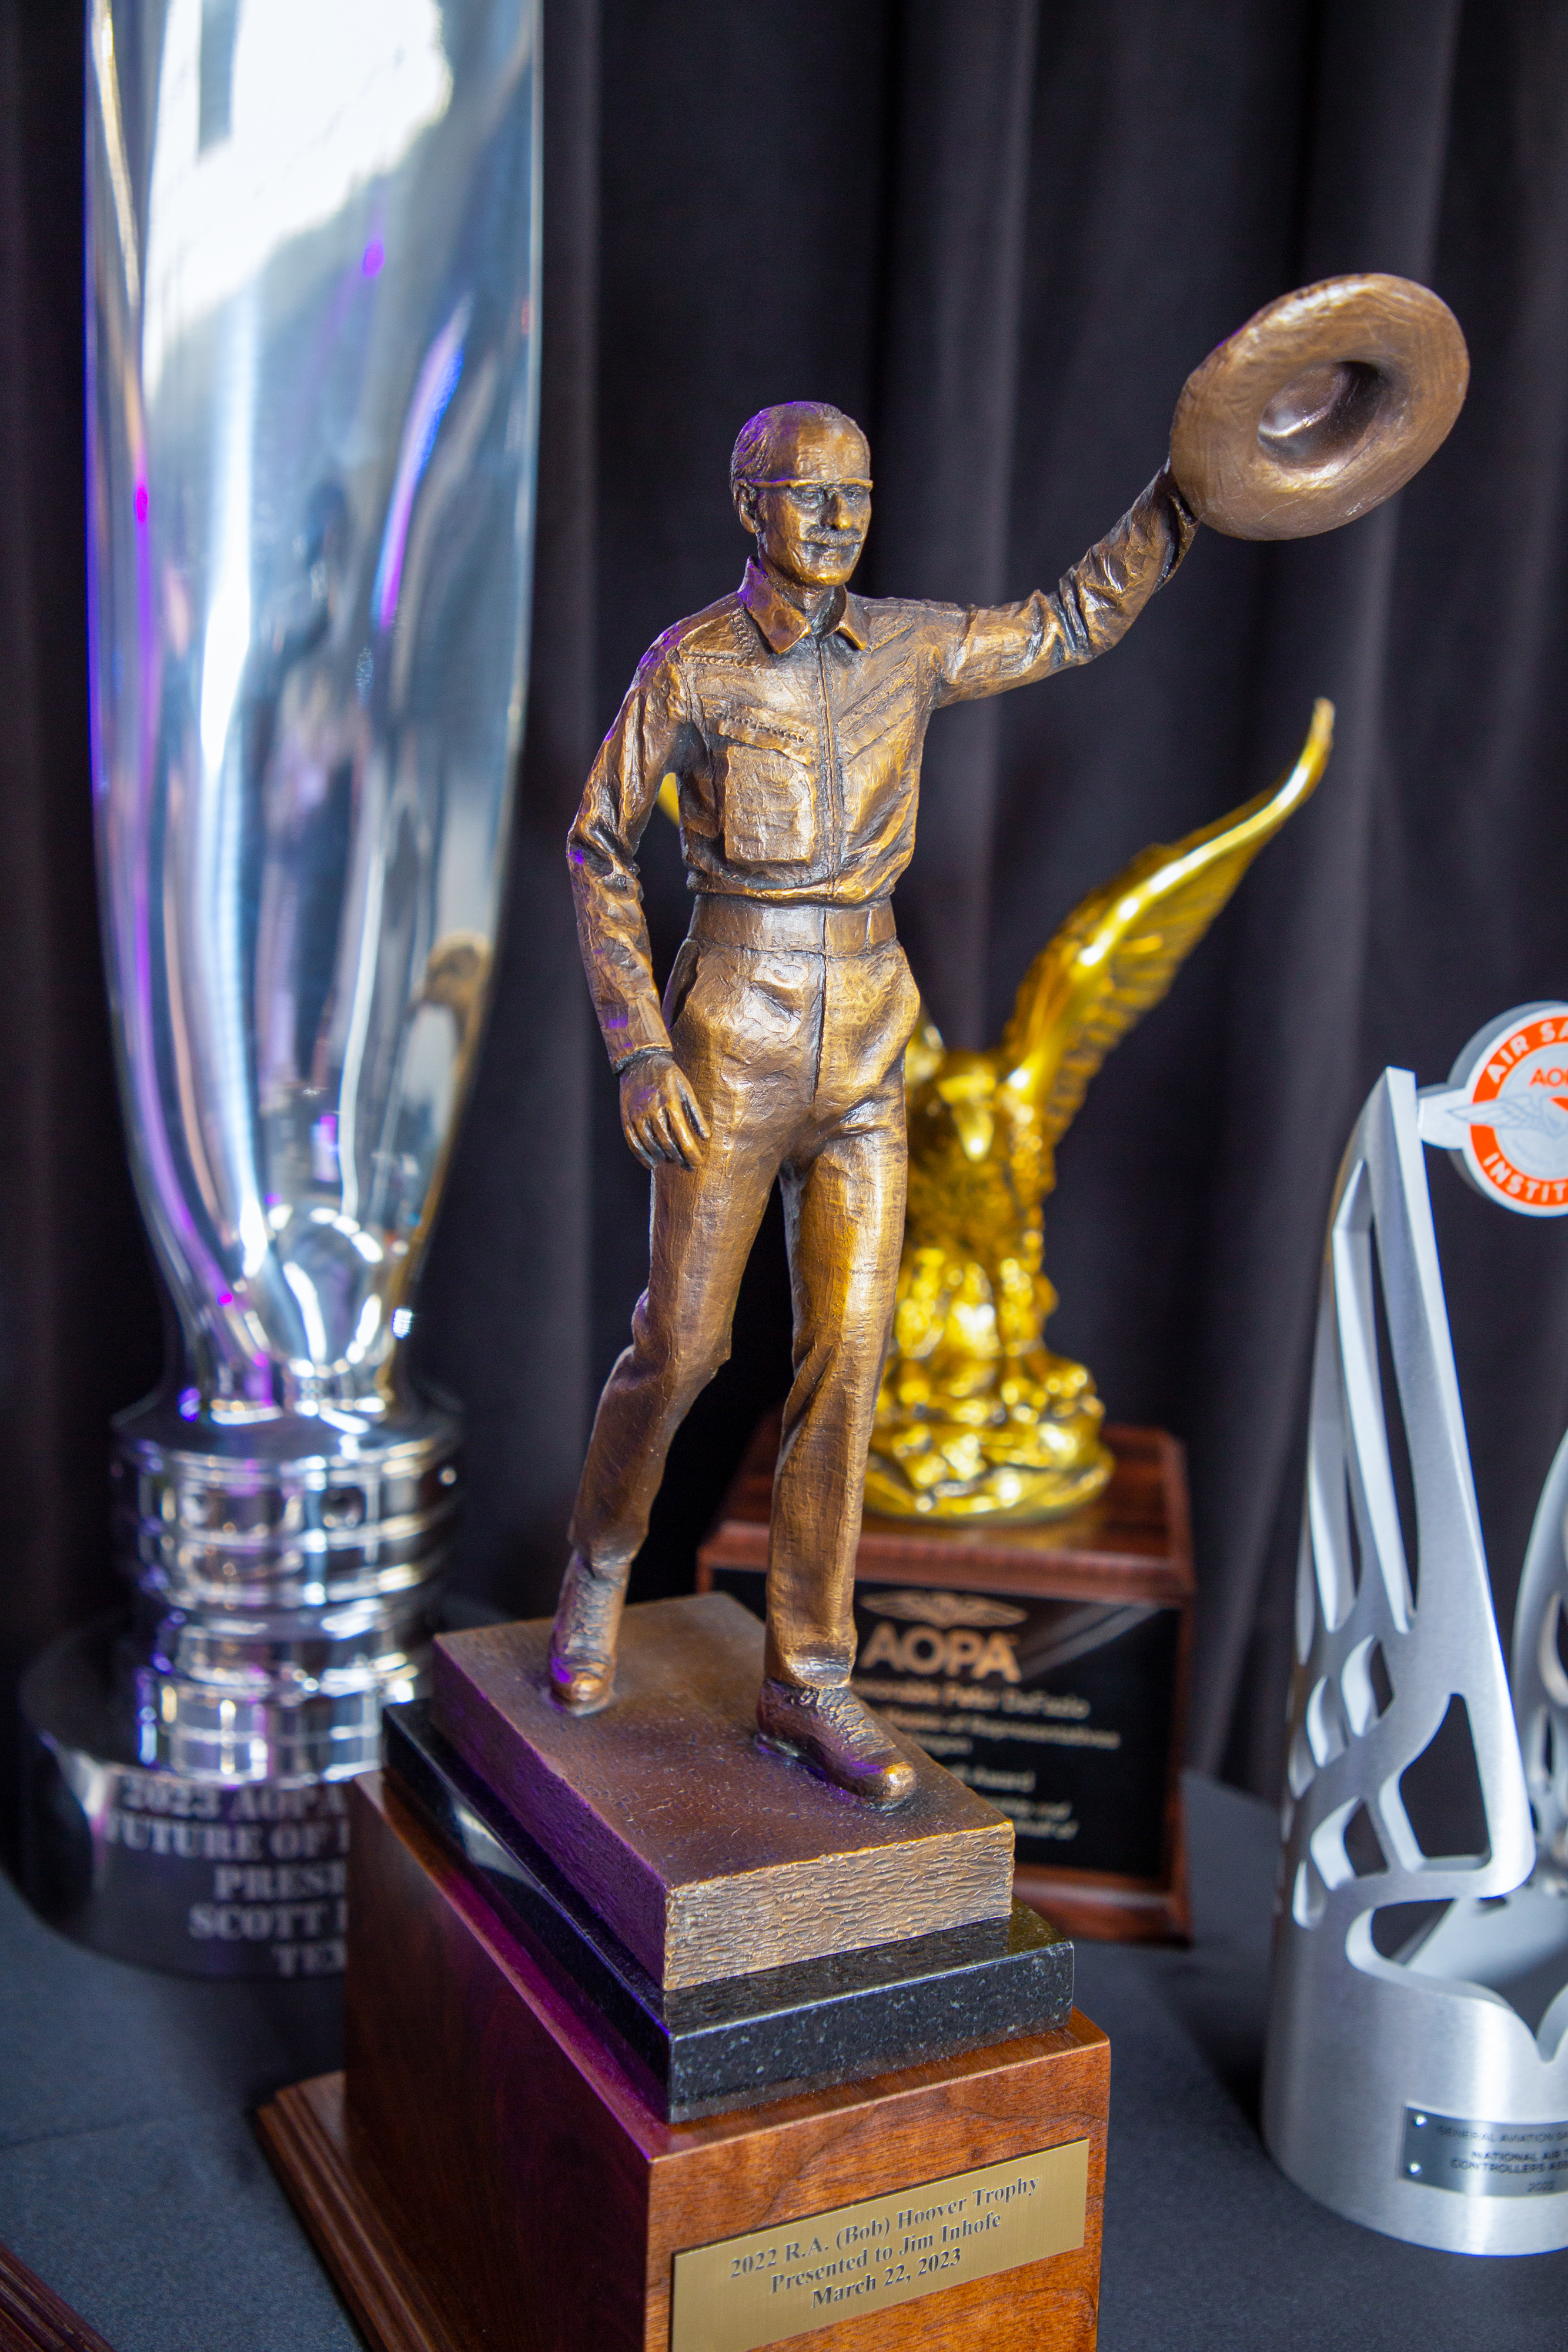 The R.A. 'Bob' Hoover Trophy. Photo by Rebecca Boone.